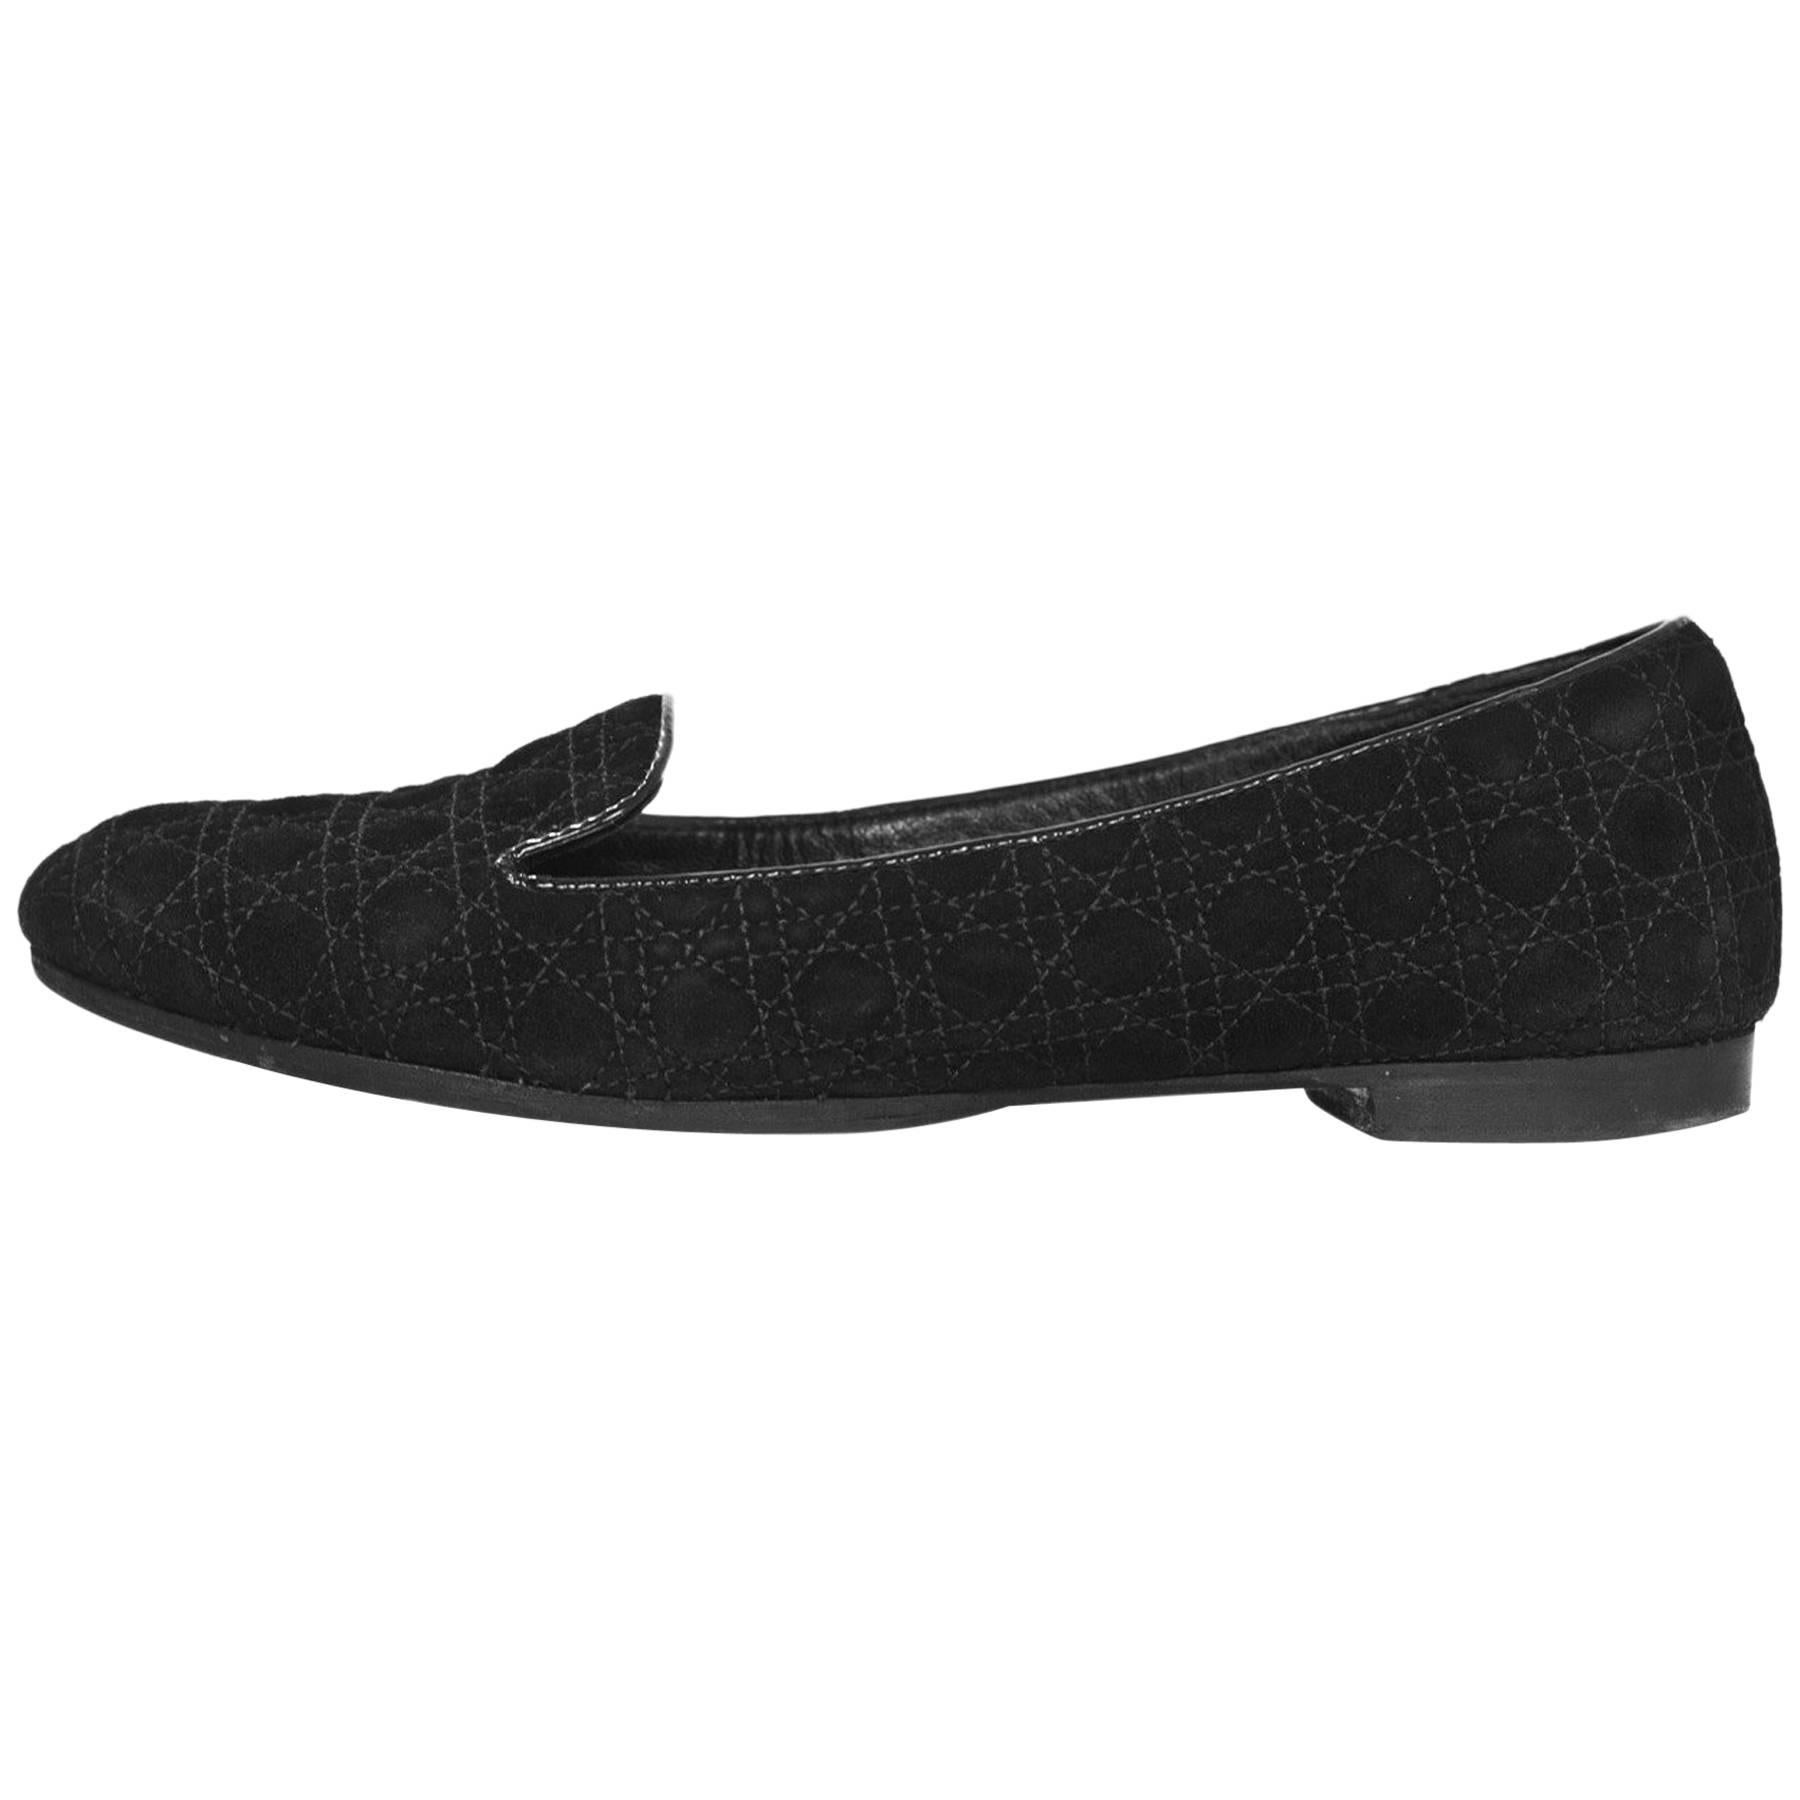 Christian Dior Black Suede Quilted Loafers Sz 35 rt. $610